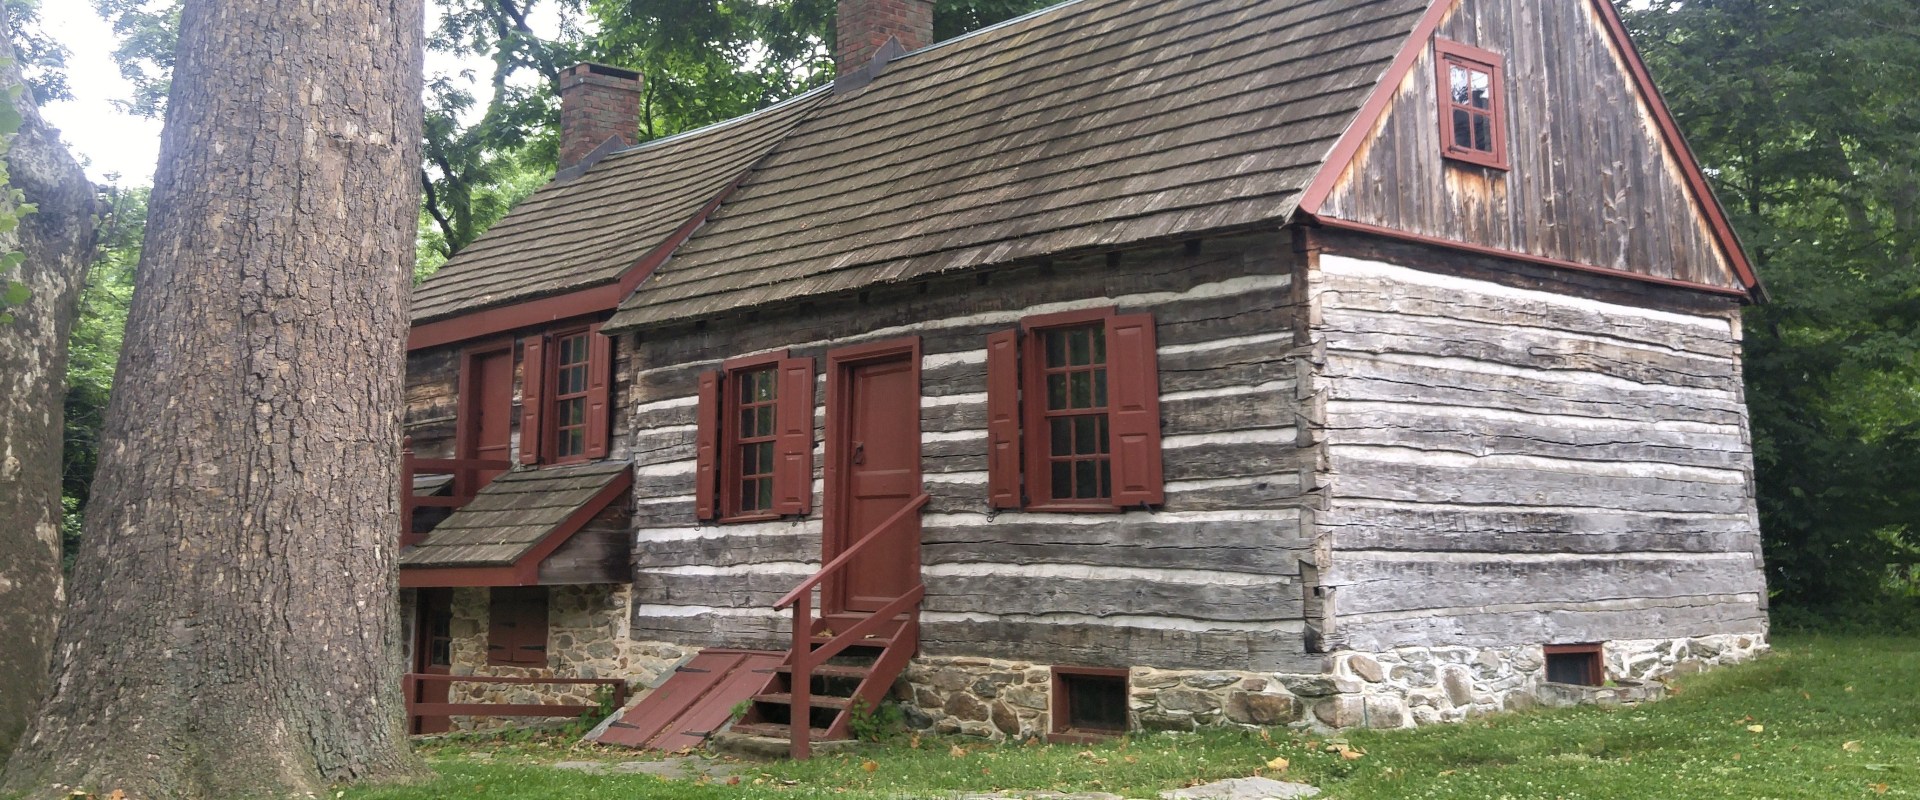 The Early Settlers of Bucks County, Pennsylvania: A Historical Overview